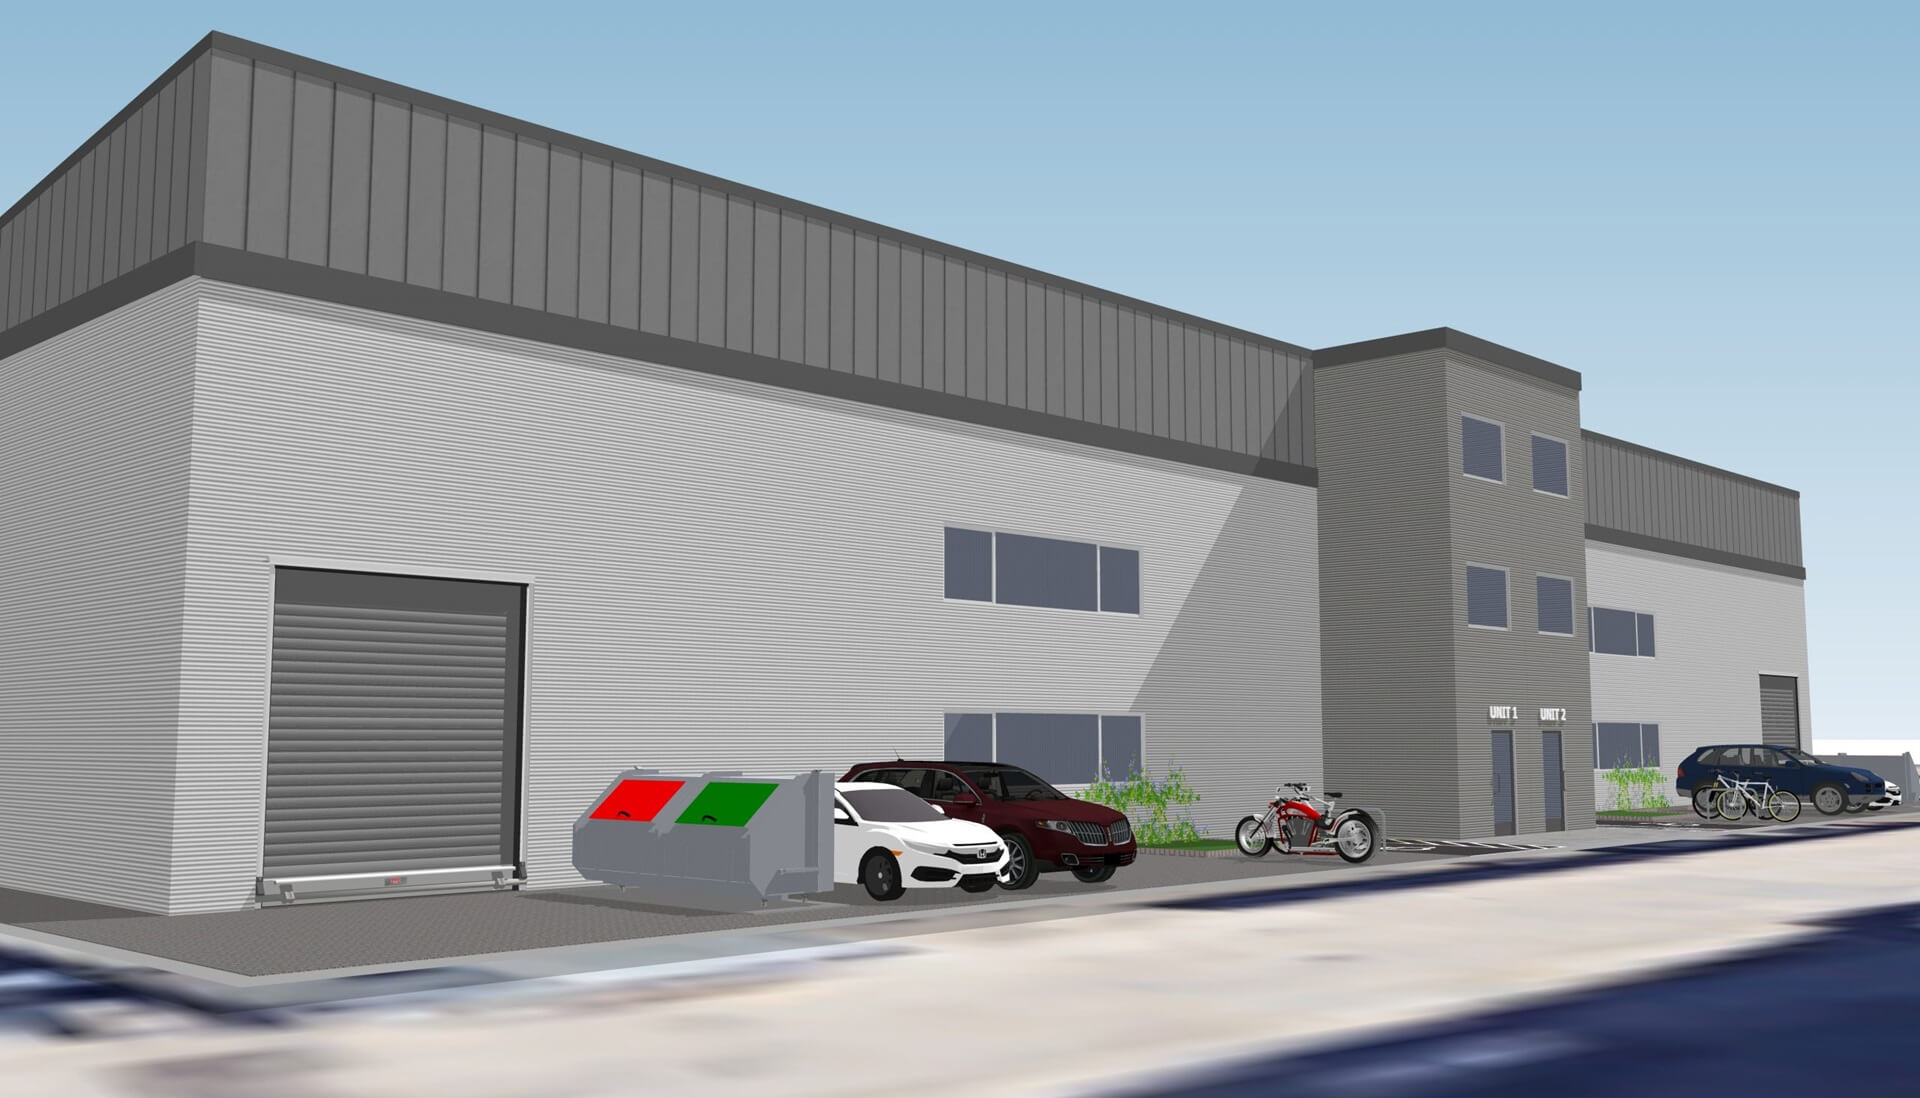 Planning Permission for New Warehouse, Ealing